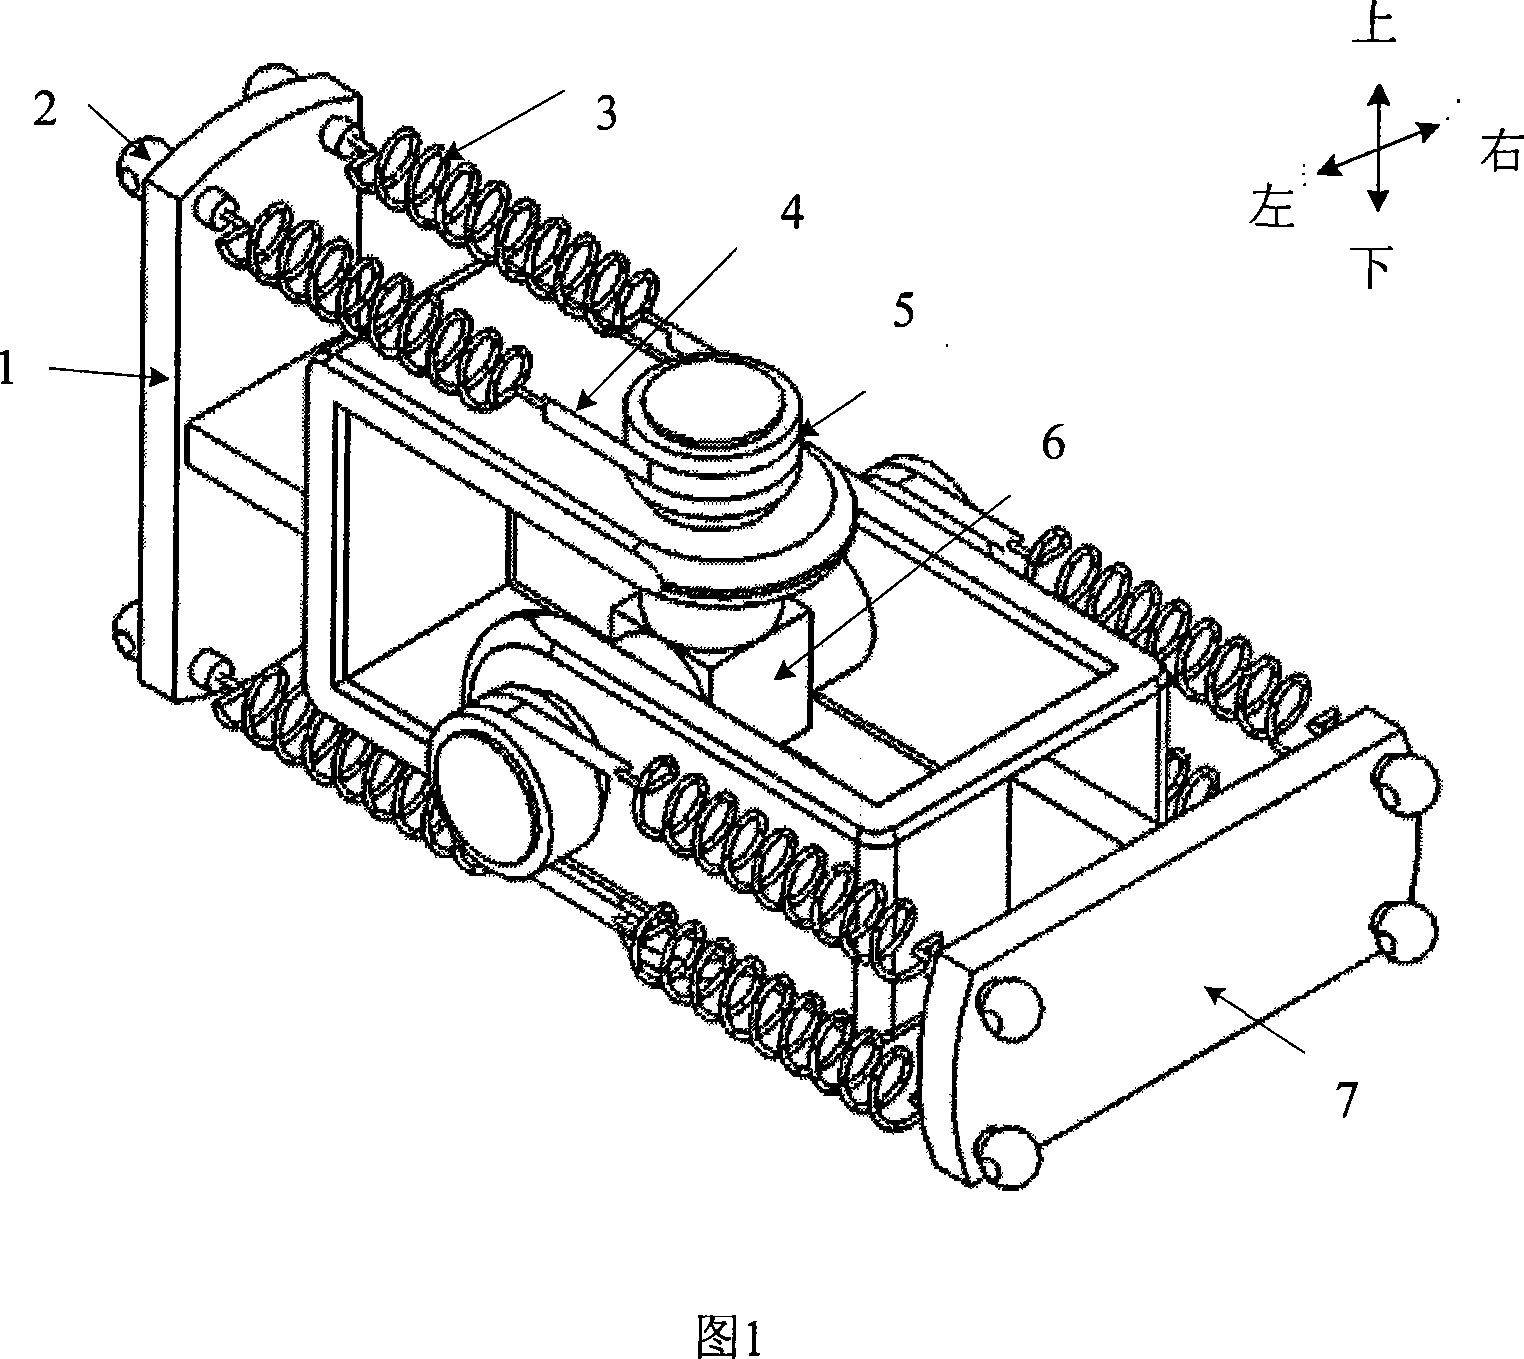 Driving joint for cross axle type robot based on marmen